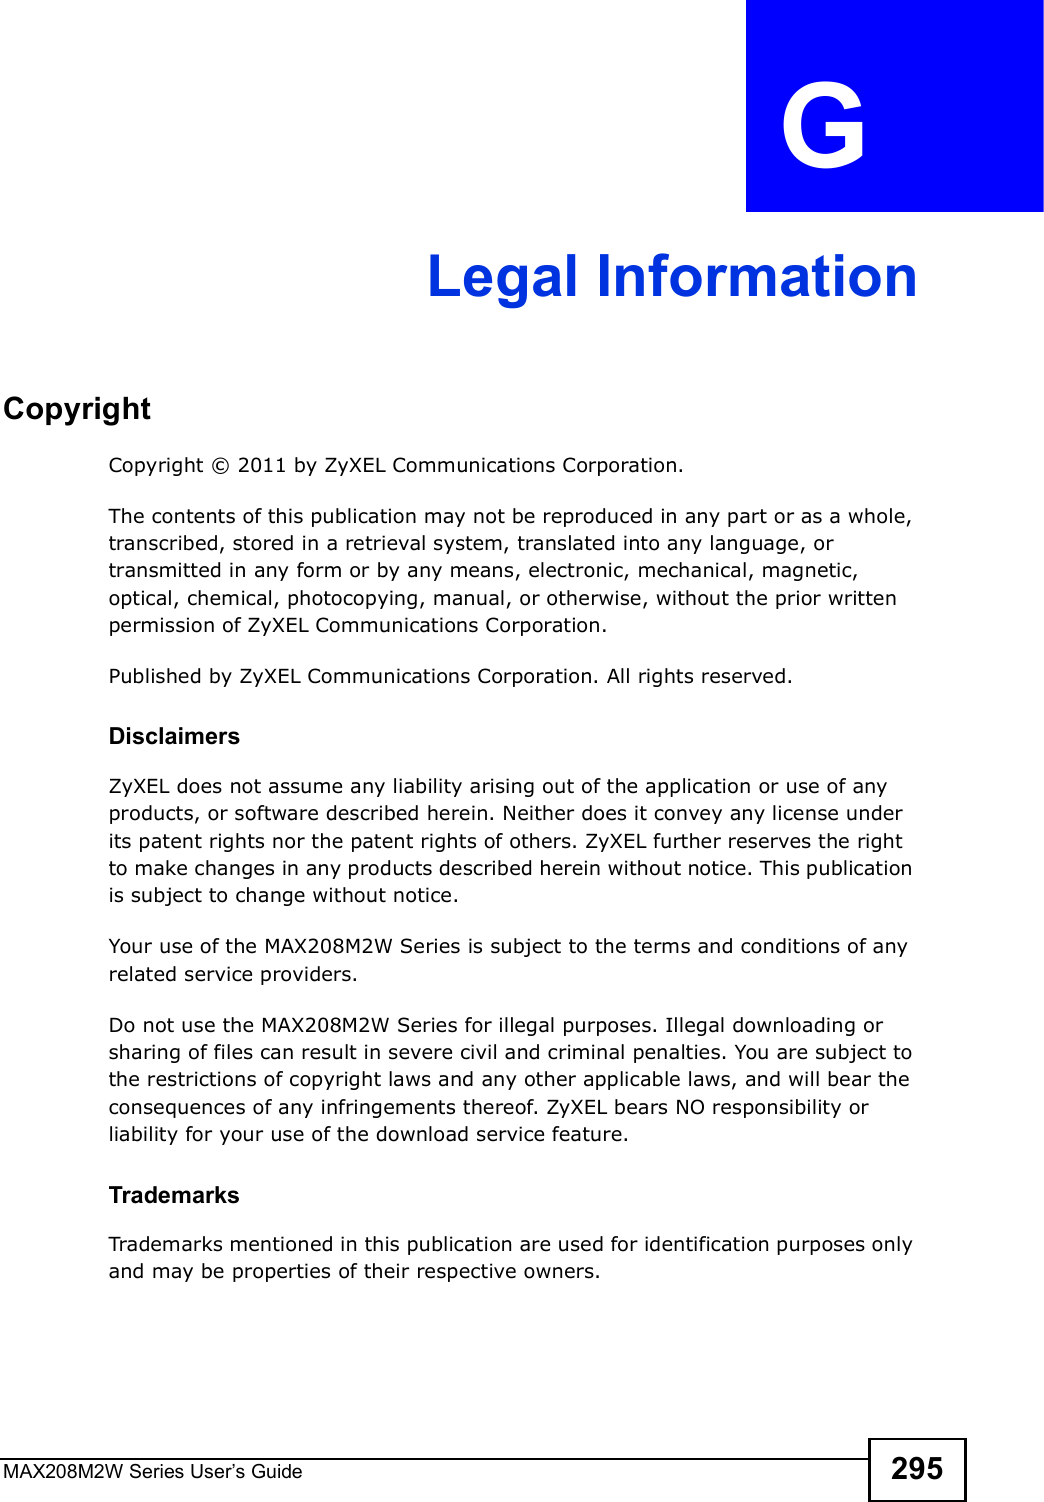 MAX208M2W Series User s Guide 295APPENDIX  G Legal InformationCopyrightCopyright © 2011 by ZyXEL Communications Corporation.The contents of this publication may not be reproduced in any part or as a whole, transcribed, stored in a retrieval system, translated into any language, or transmitted in any form or by any means, electronic, mechanical, magnetic, optical, chemical, photocopying, manual, or otherwise, without the prior written permission of ZyXEL Communications Corporation.Published by ZyXEL Communications Corporation. All rights reserved.DisclaimersZyXEL does not assume any liability arising out of the application or use of any products, or software described herein. Neither does it convey any license under its patent rights nor the patent rights of others. ZyXEL further reserves the right to make changes in any products described herein without notice. This publication is subject to change without notice.Your use of the MAX208M2W Series is subject to the terms and conditions of any related service providers.Do not use the MAX208M2W Series for illegal purposes. Illegal downloading or sharing of files can result in severe civil and criminal penalties. You are subject to the restrictions of copyright laws and any other applicable laws, and will bear the consequences of any infringements thereof. ZyXEL bears NO responsibility or liability for your use of the download service feature.TrademarksTrademarks mentioned in this publication are used for identification purposes only and may be properties of their respective owners.